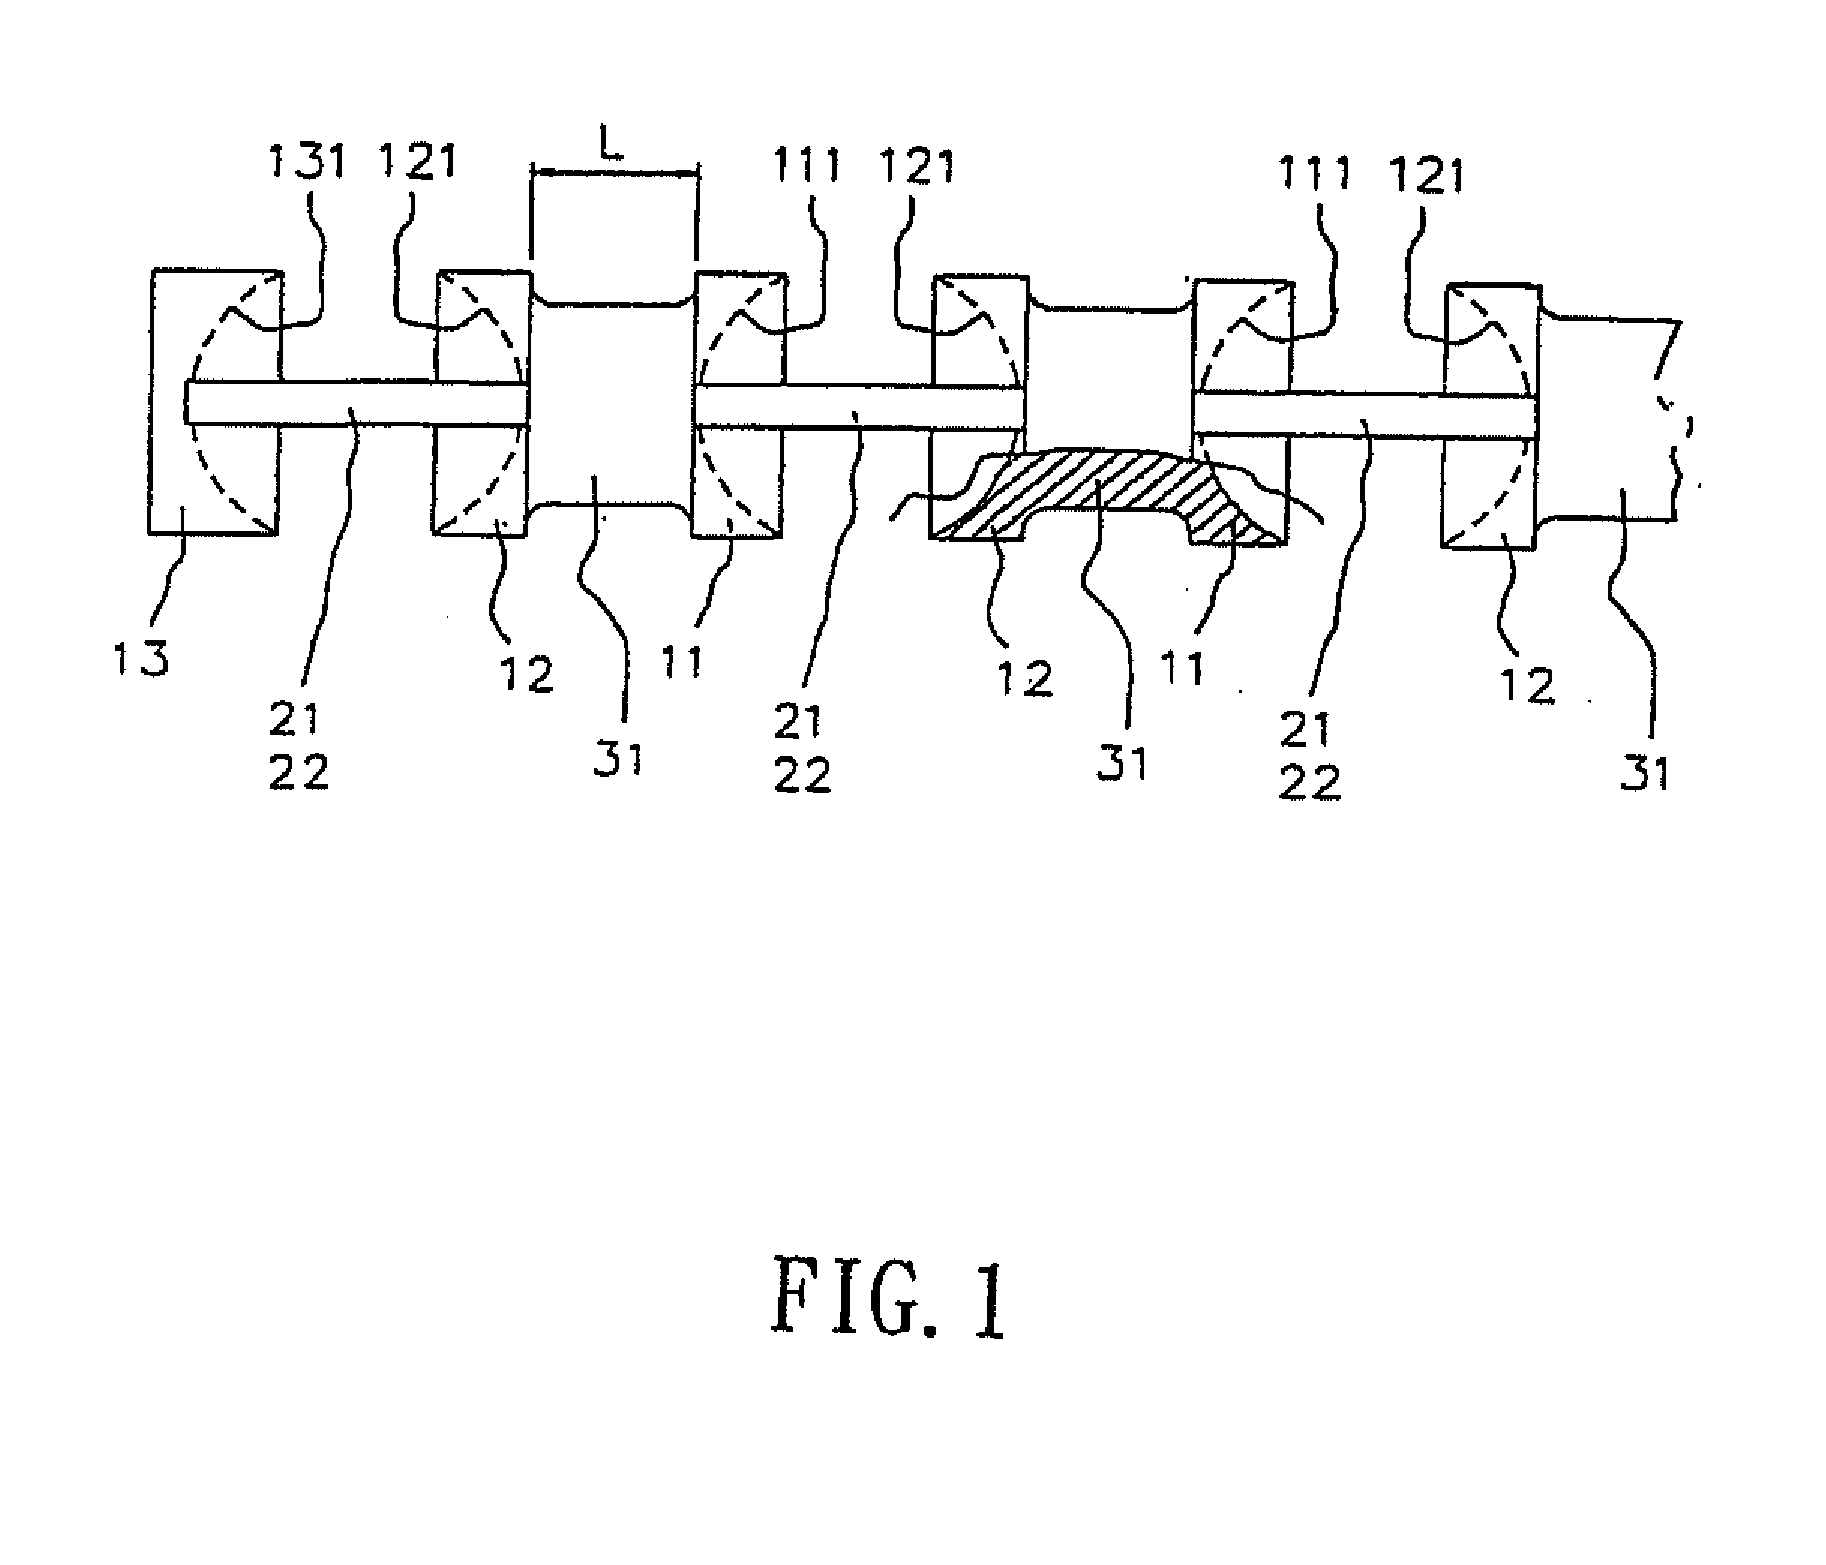 Ball Connecting Body for a Rolling Motion Apparatus